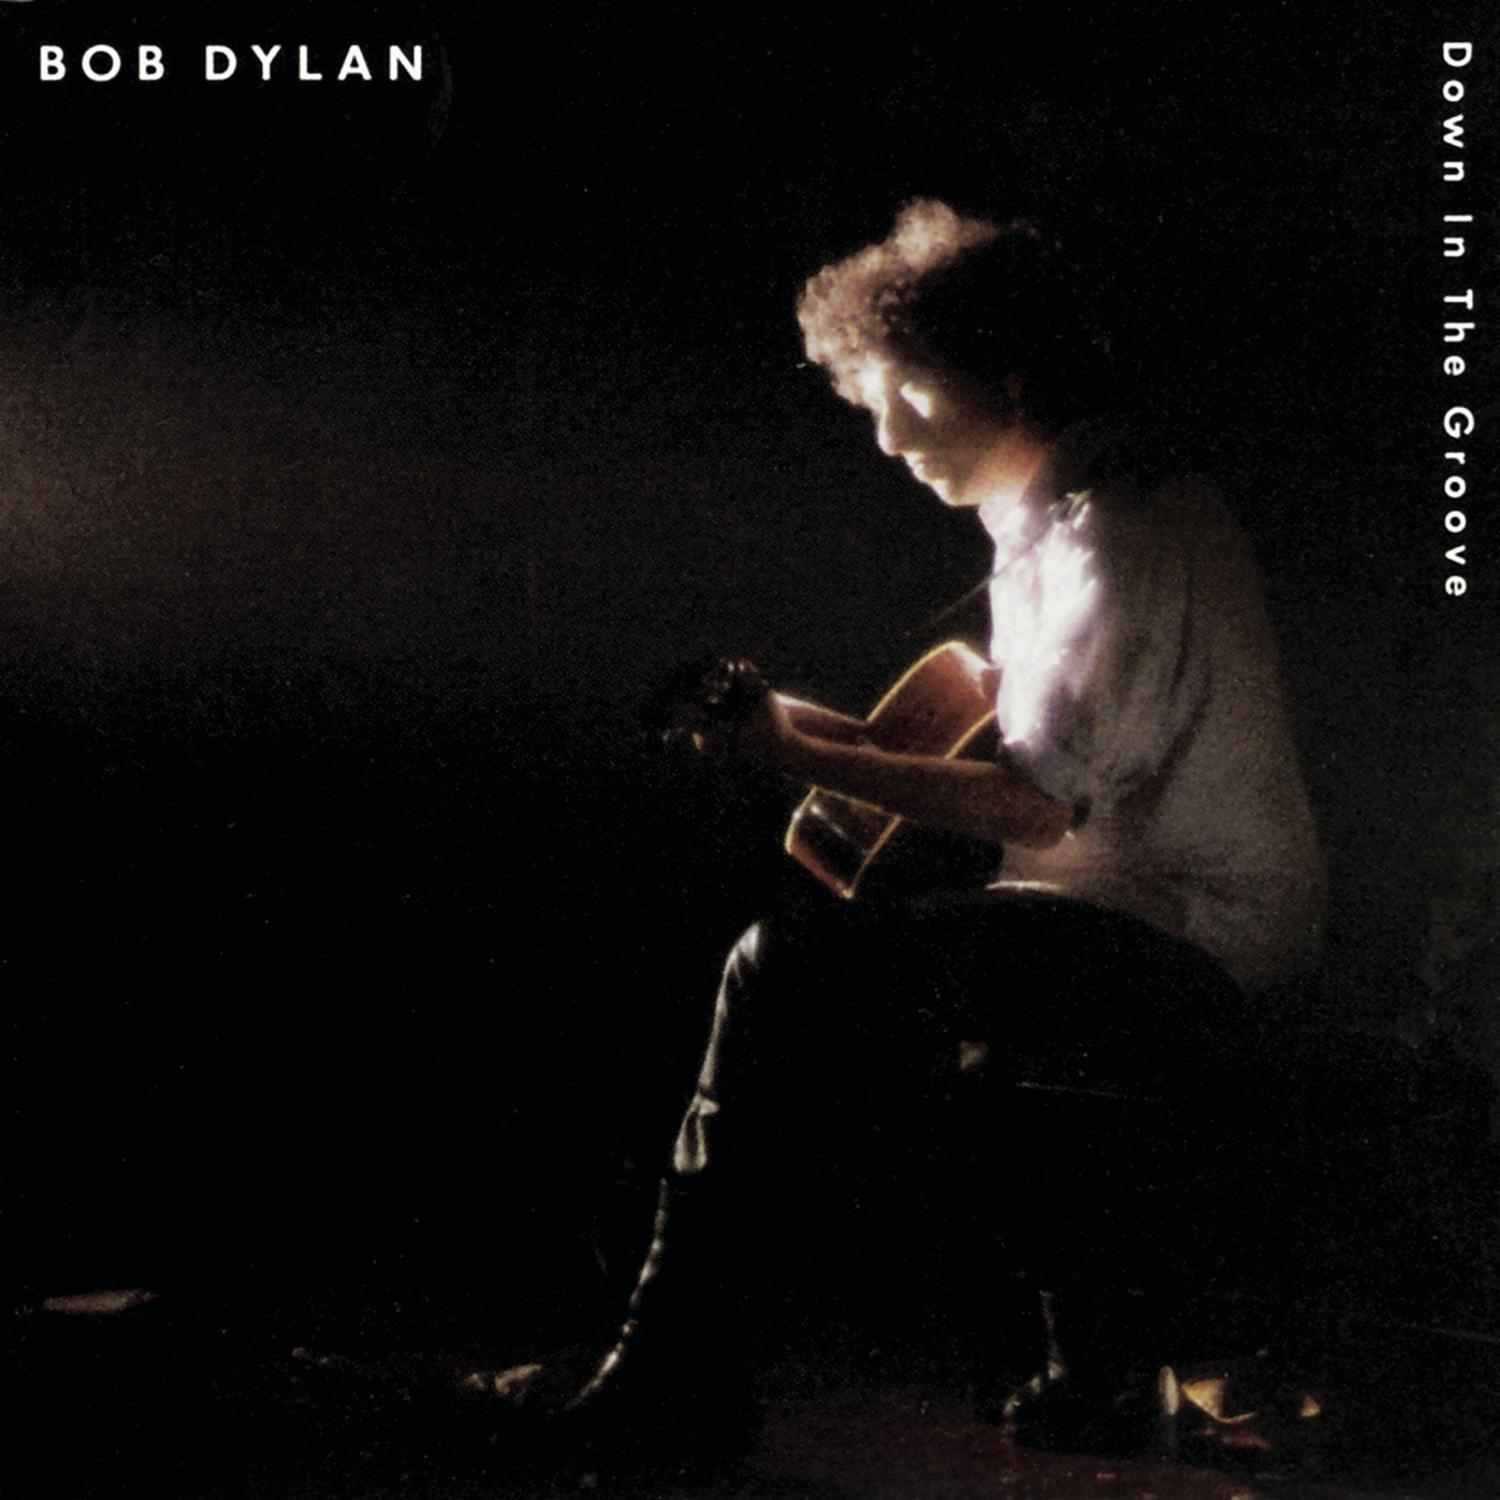 THE Dylan - (Vinyl) Bob DOWN - IN GROOVE